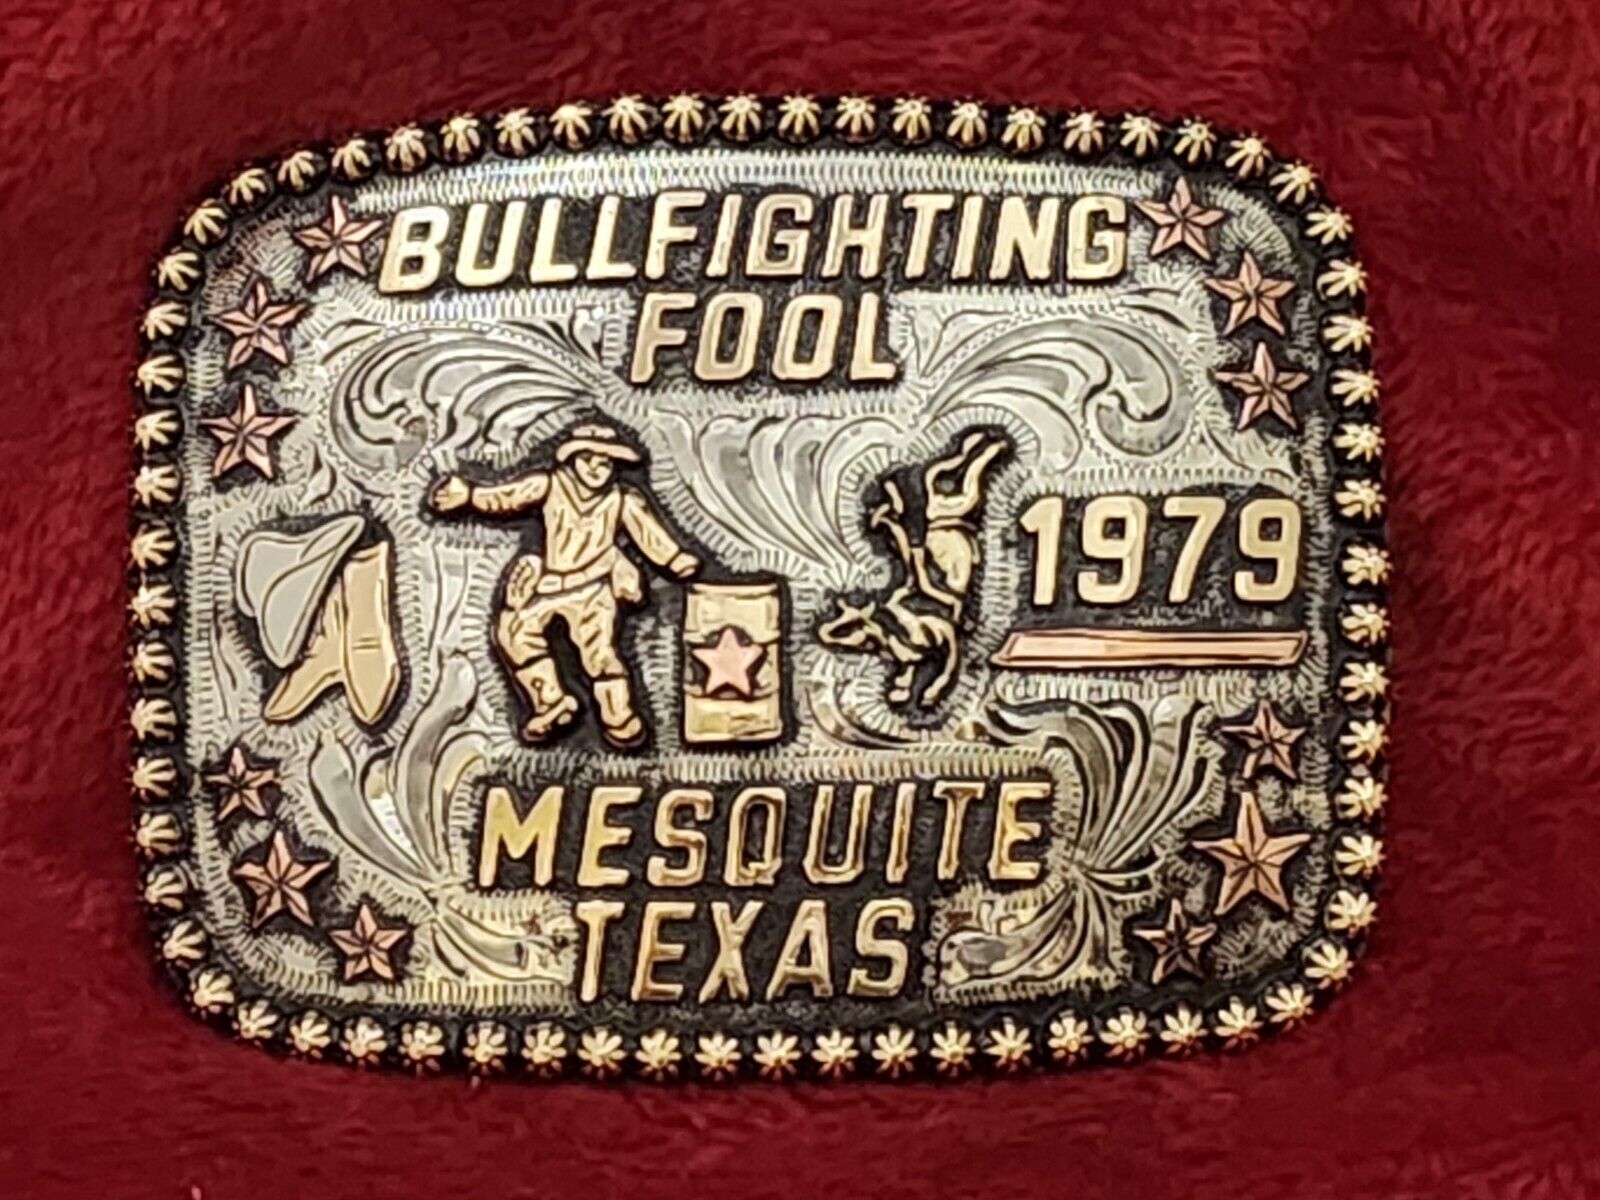 CHAMPION TROPHY RODEO BUCKLE PRO BULLFIGHTER BUCKLE☆MESQUITE TEXAS☆1979☆RARE☆740